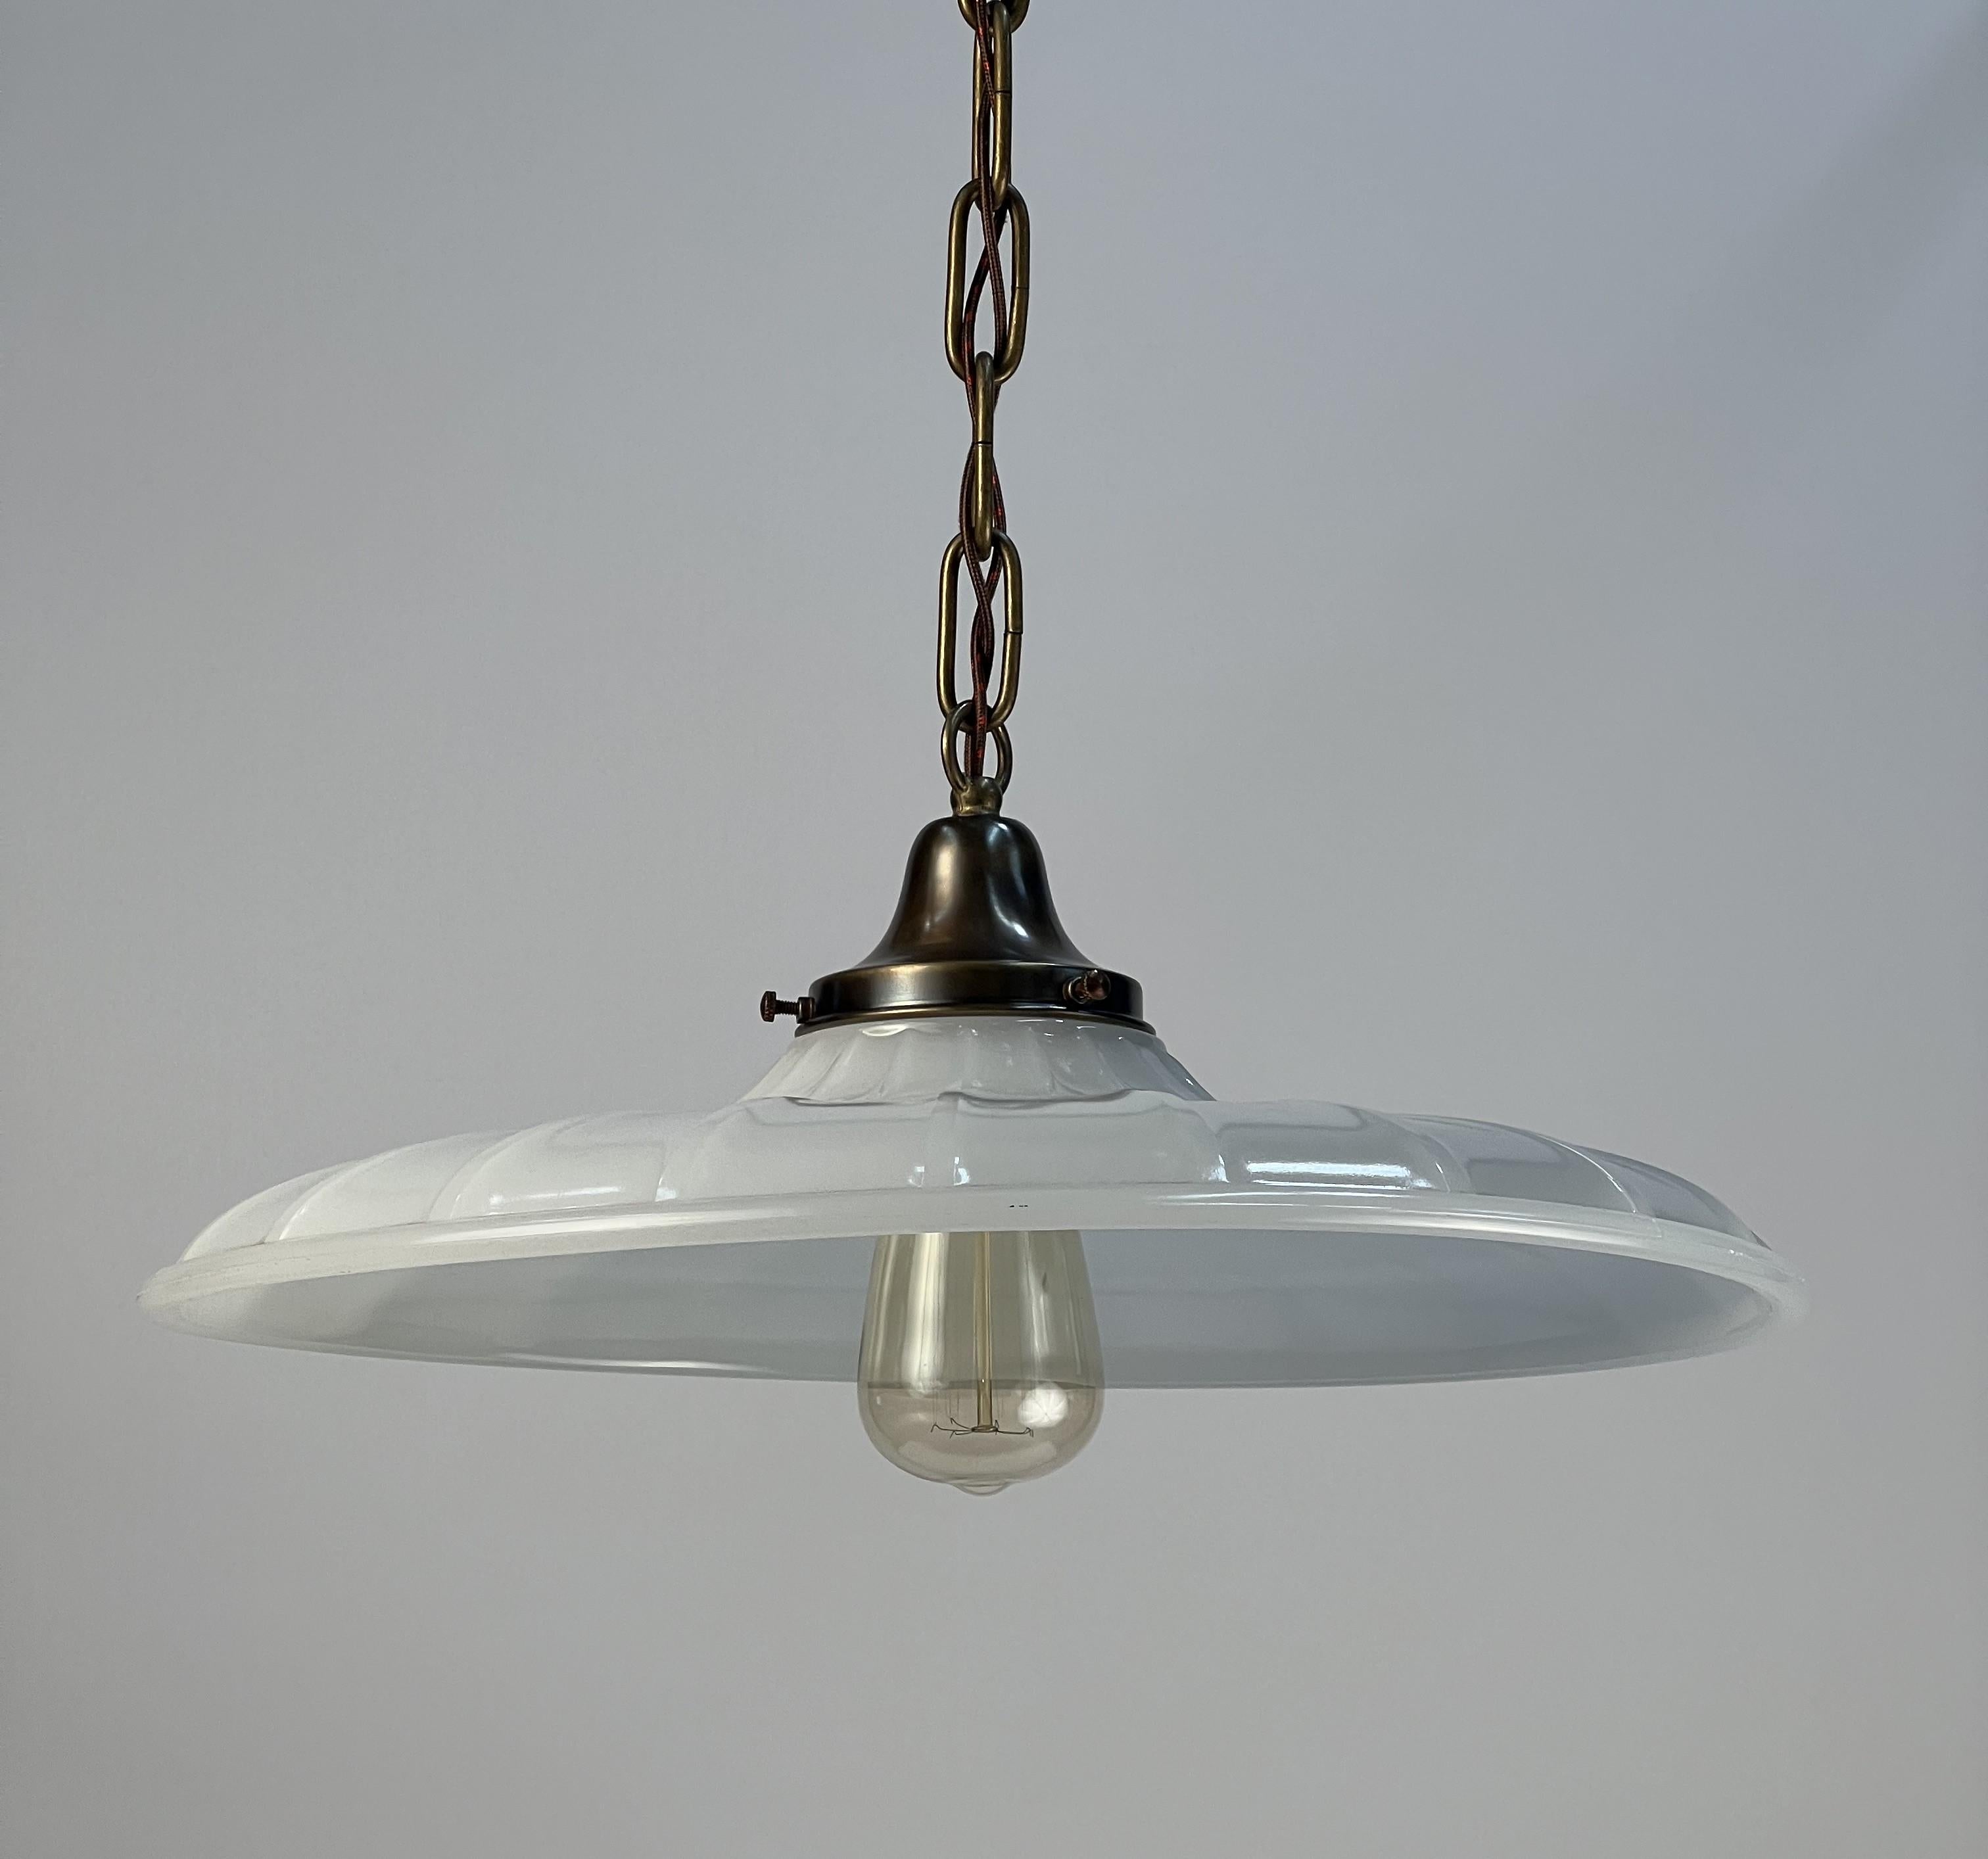 An industrial milk glass shade featuring raised ribs leading from the brass fitter to a 3/4 rounded lip. This type of glass shade would have been found in a number of industrial settings and retail stores in the early 20th century. The milk glass